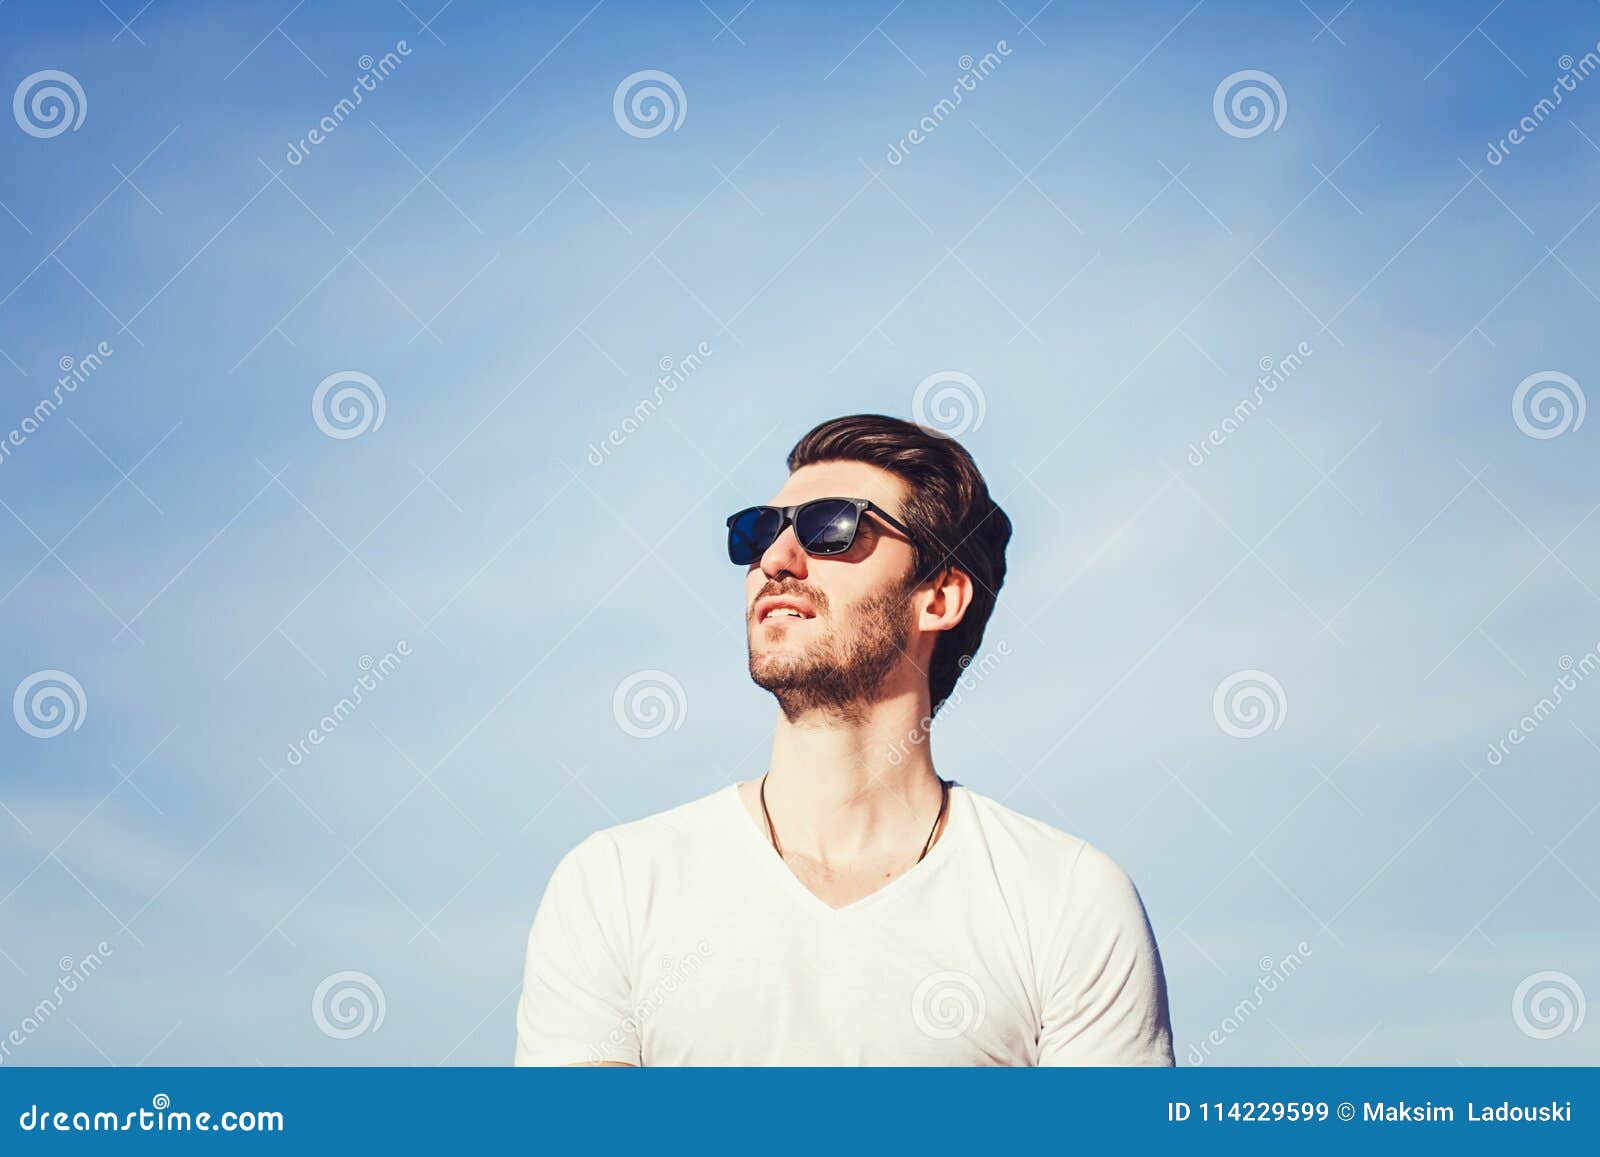 Man in Sunglasses and T-shirt Over Blue Sky Stock Image - Image of blue ...